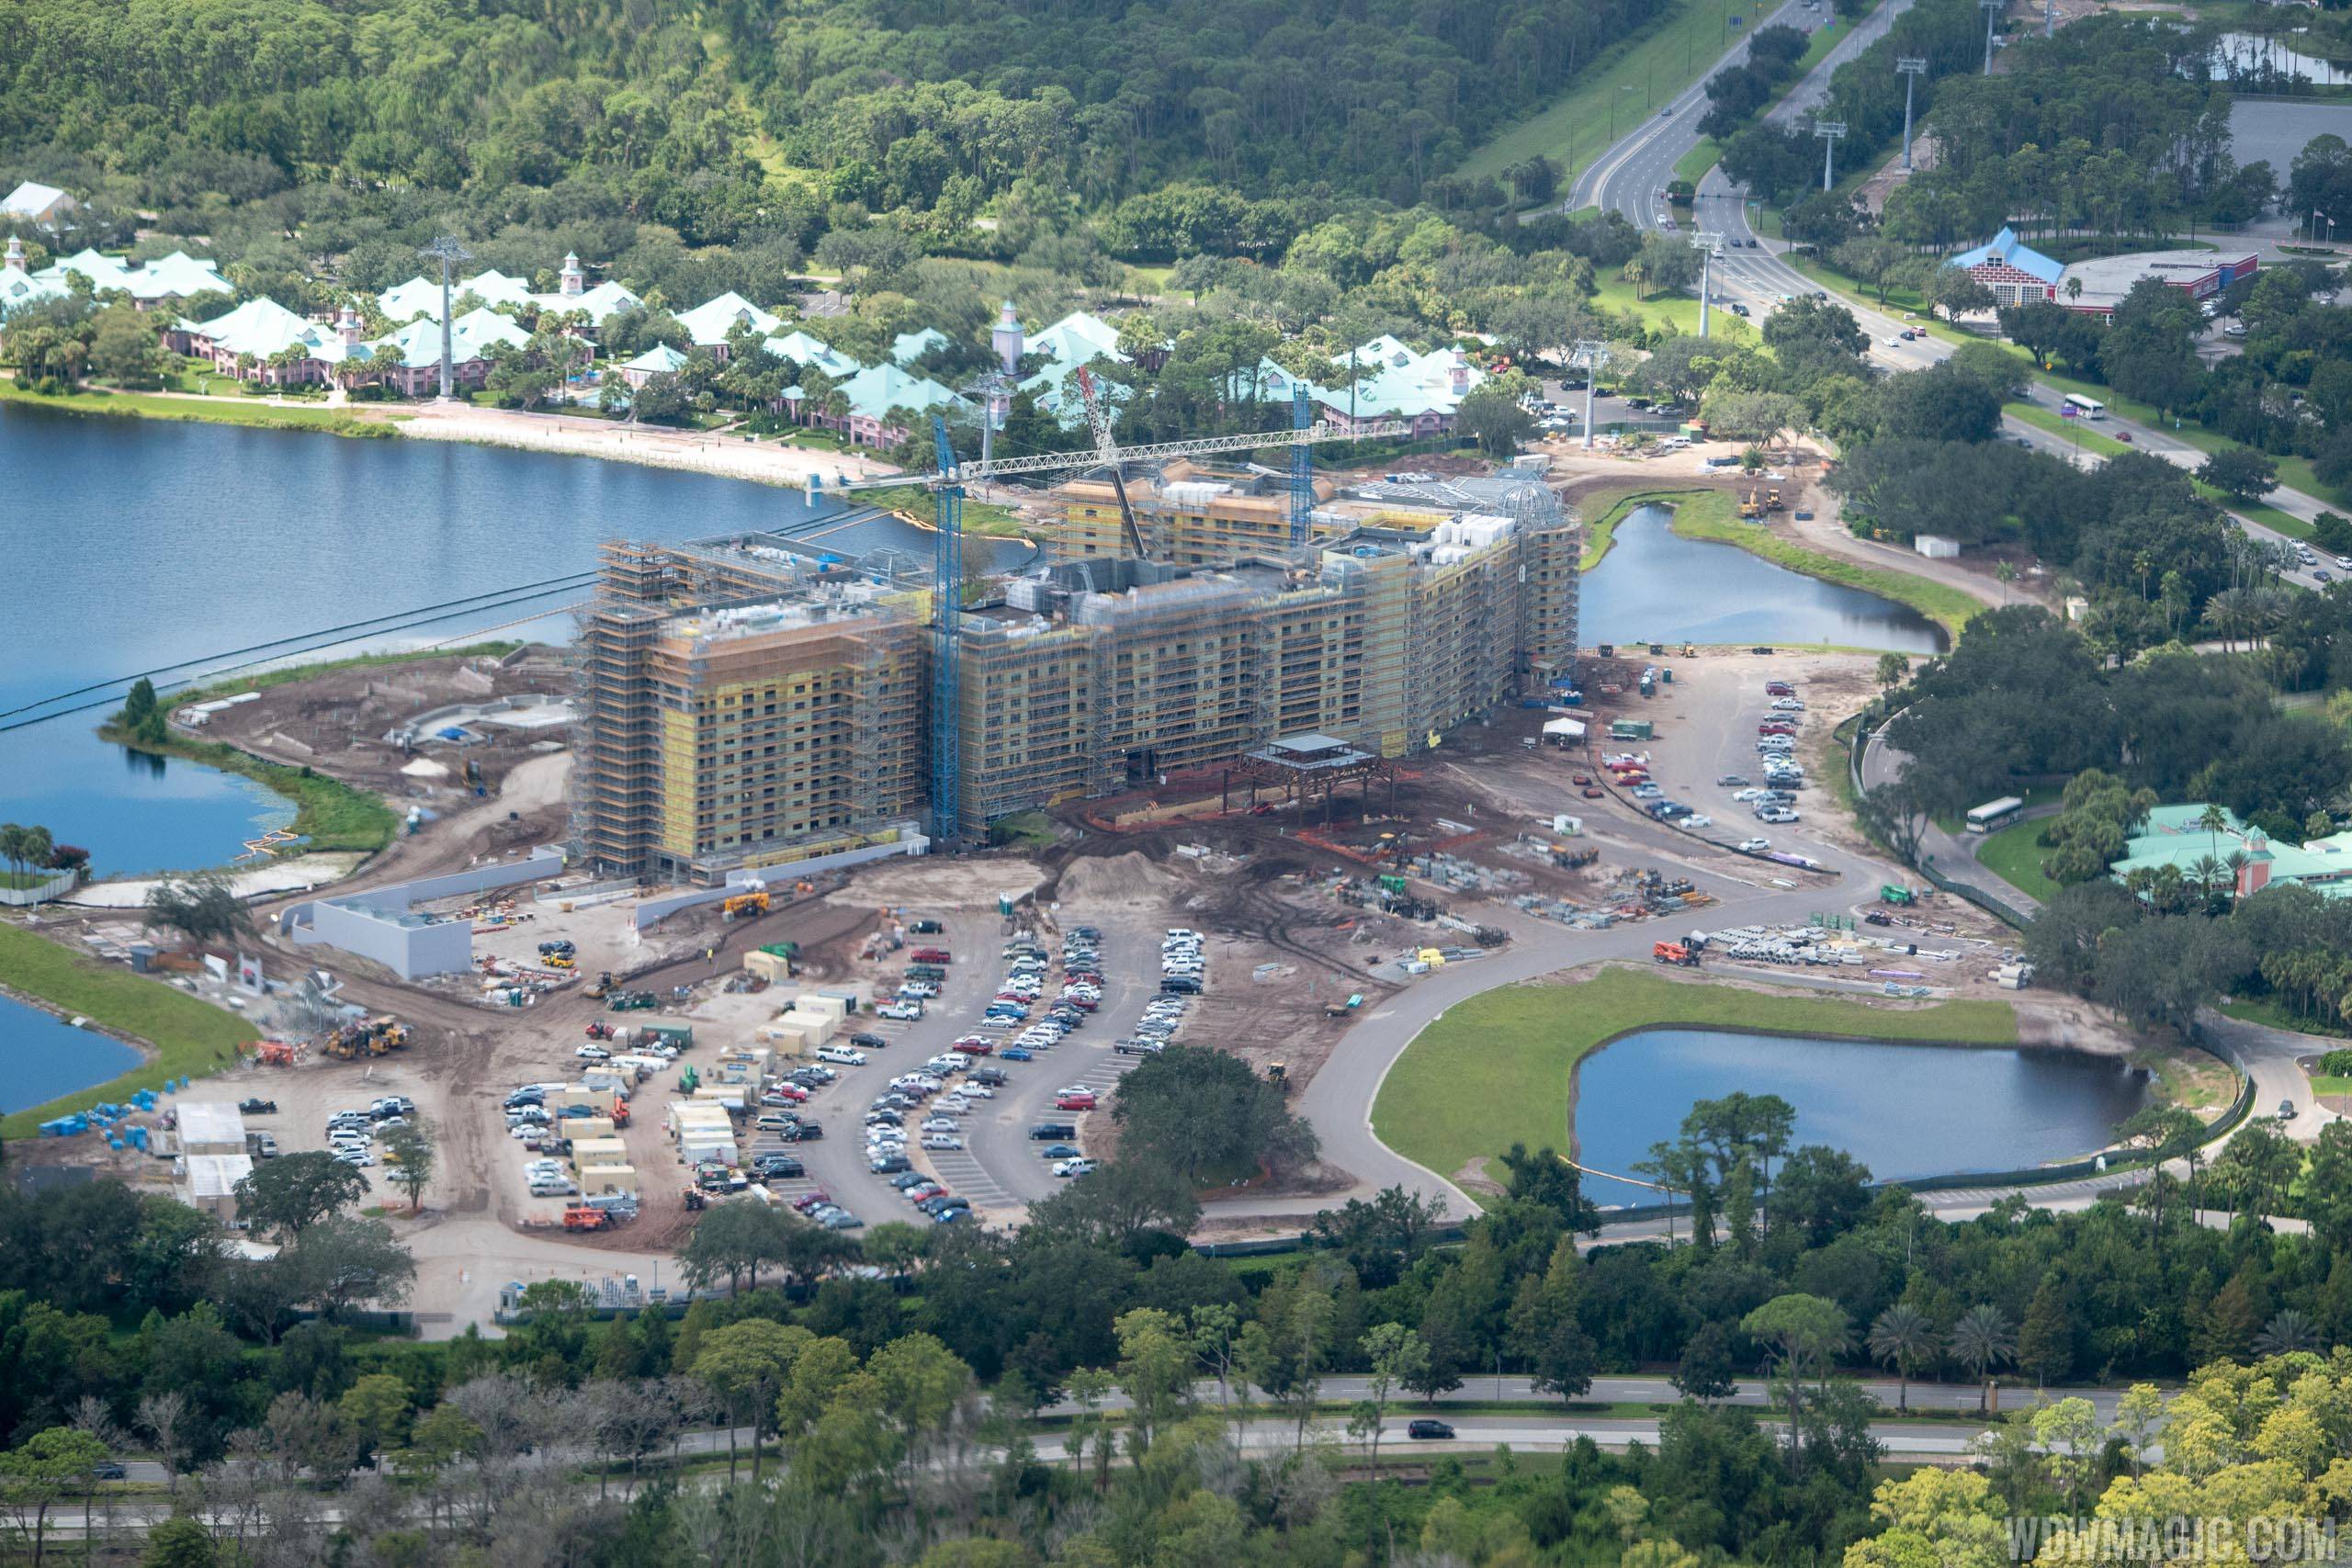 Disney Riviera construction from the air - September 2018